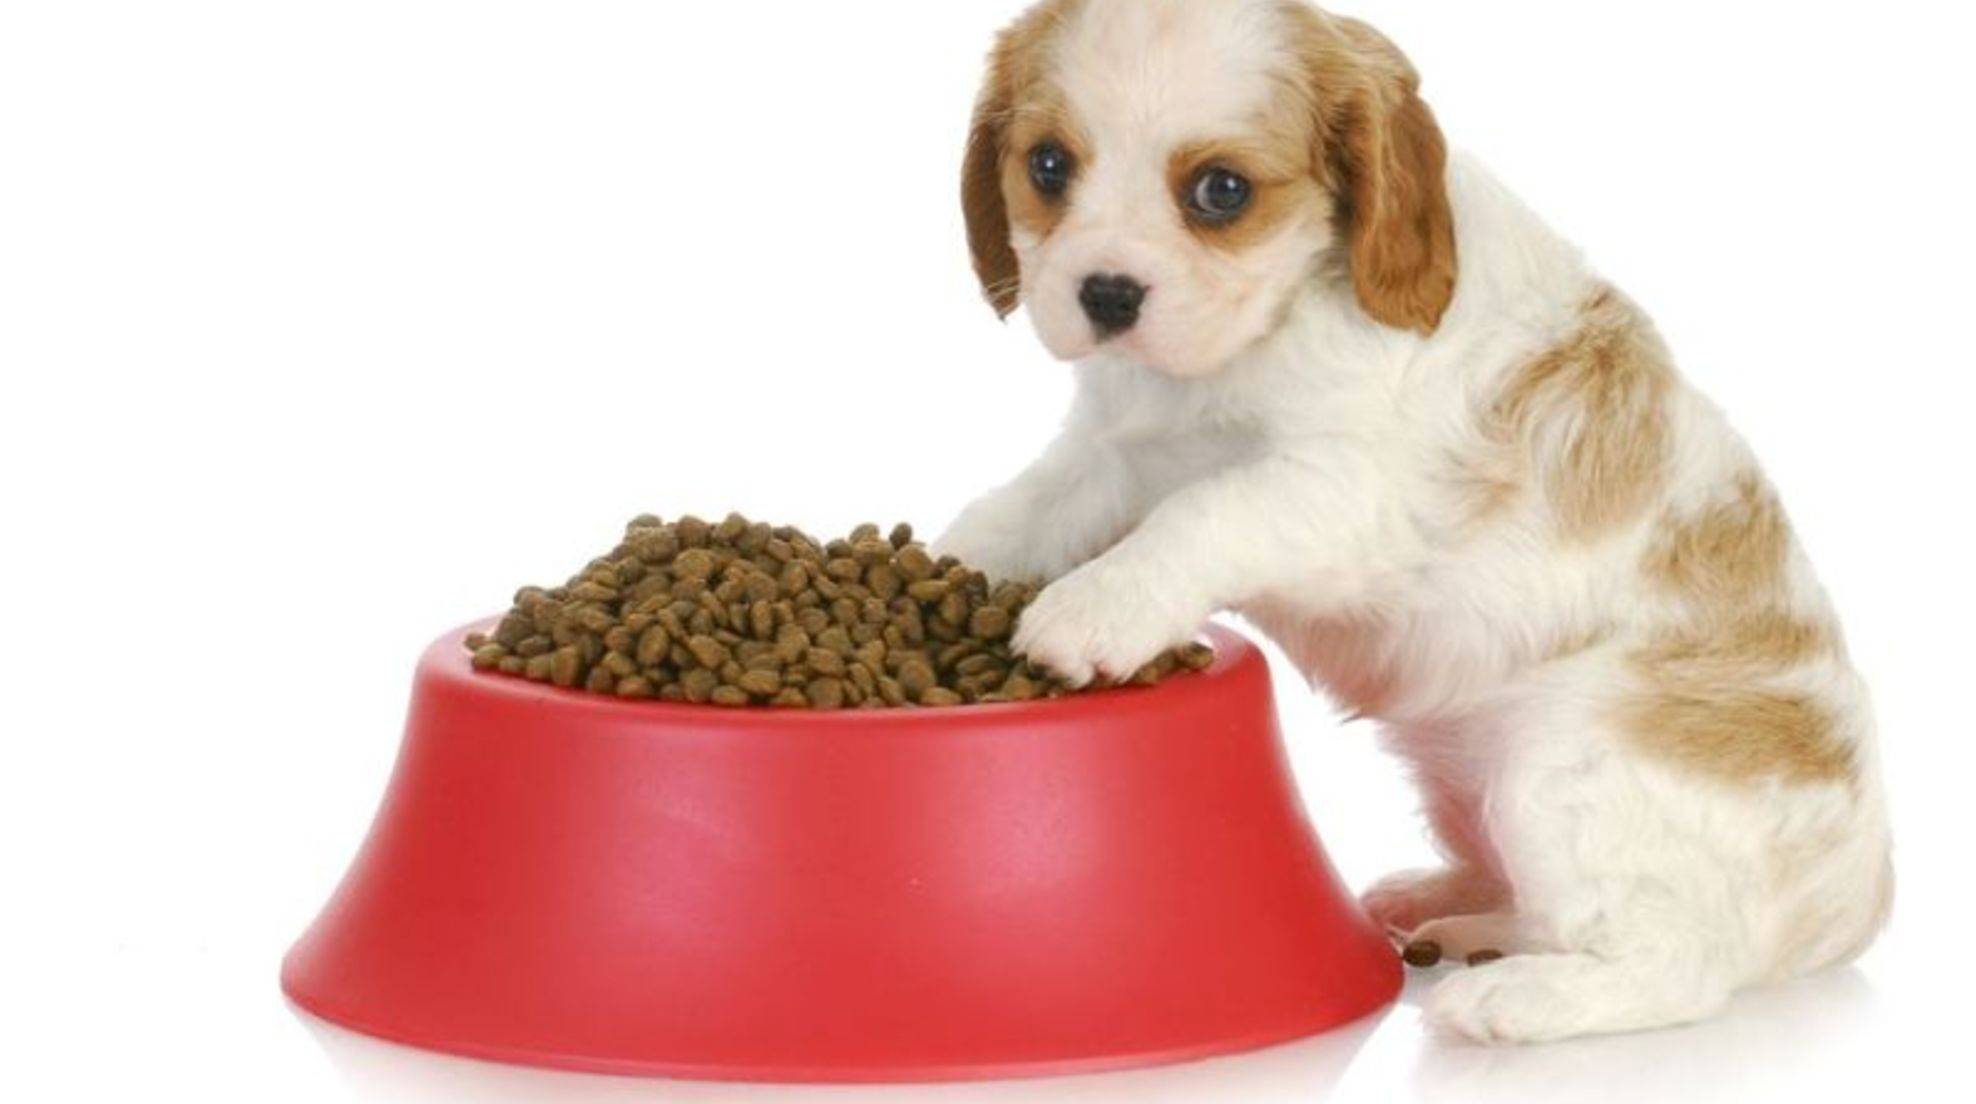 Feeding puppies correctly: What the young dog needs